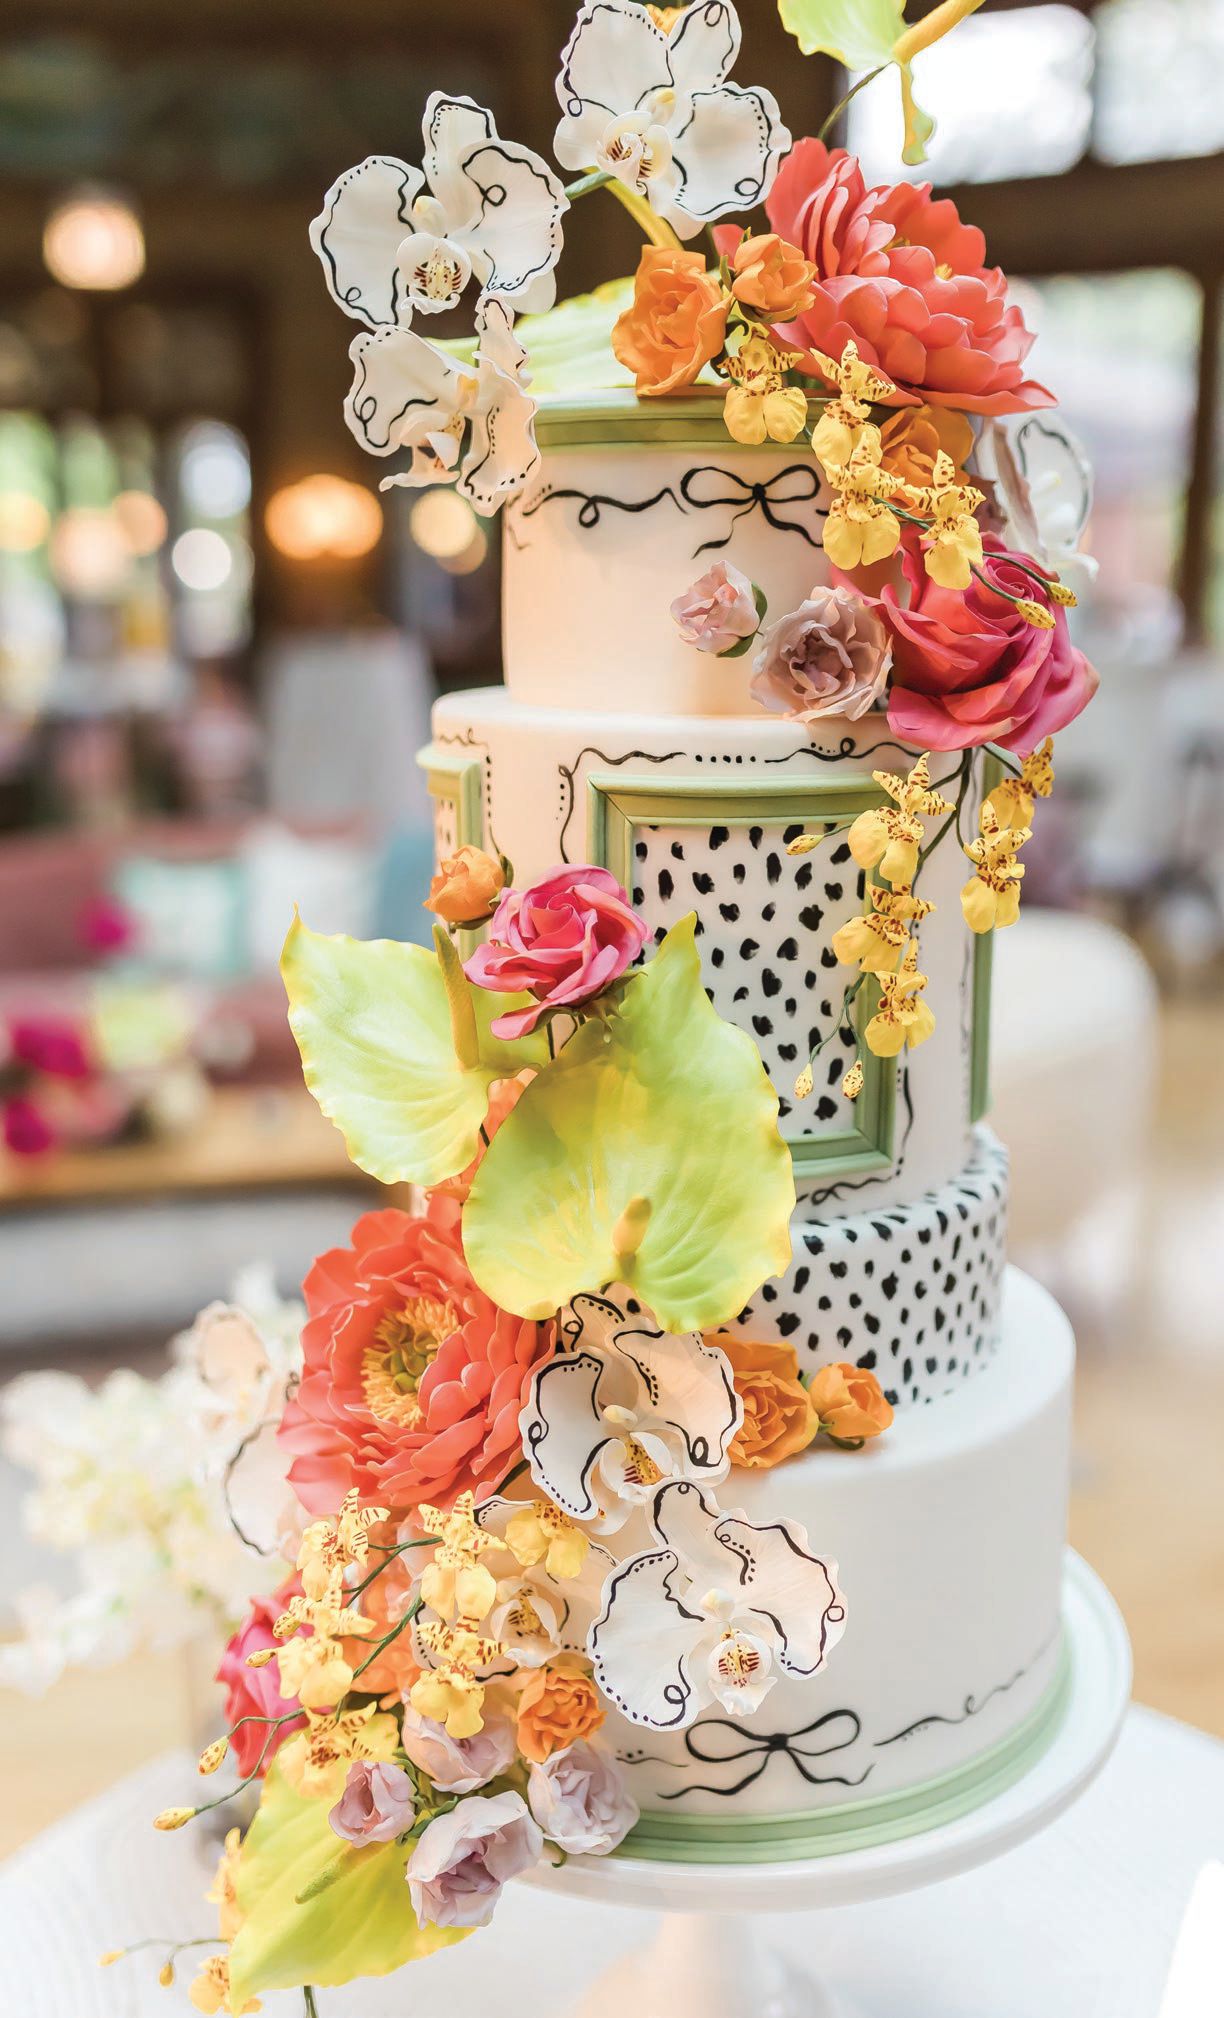 Cake Design crafted a whimsical confection with different flavor combinations in each of the four tiers PHOTO BY NATALIE PROBST PHOTOGRAPHY